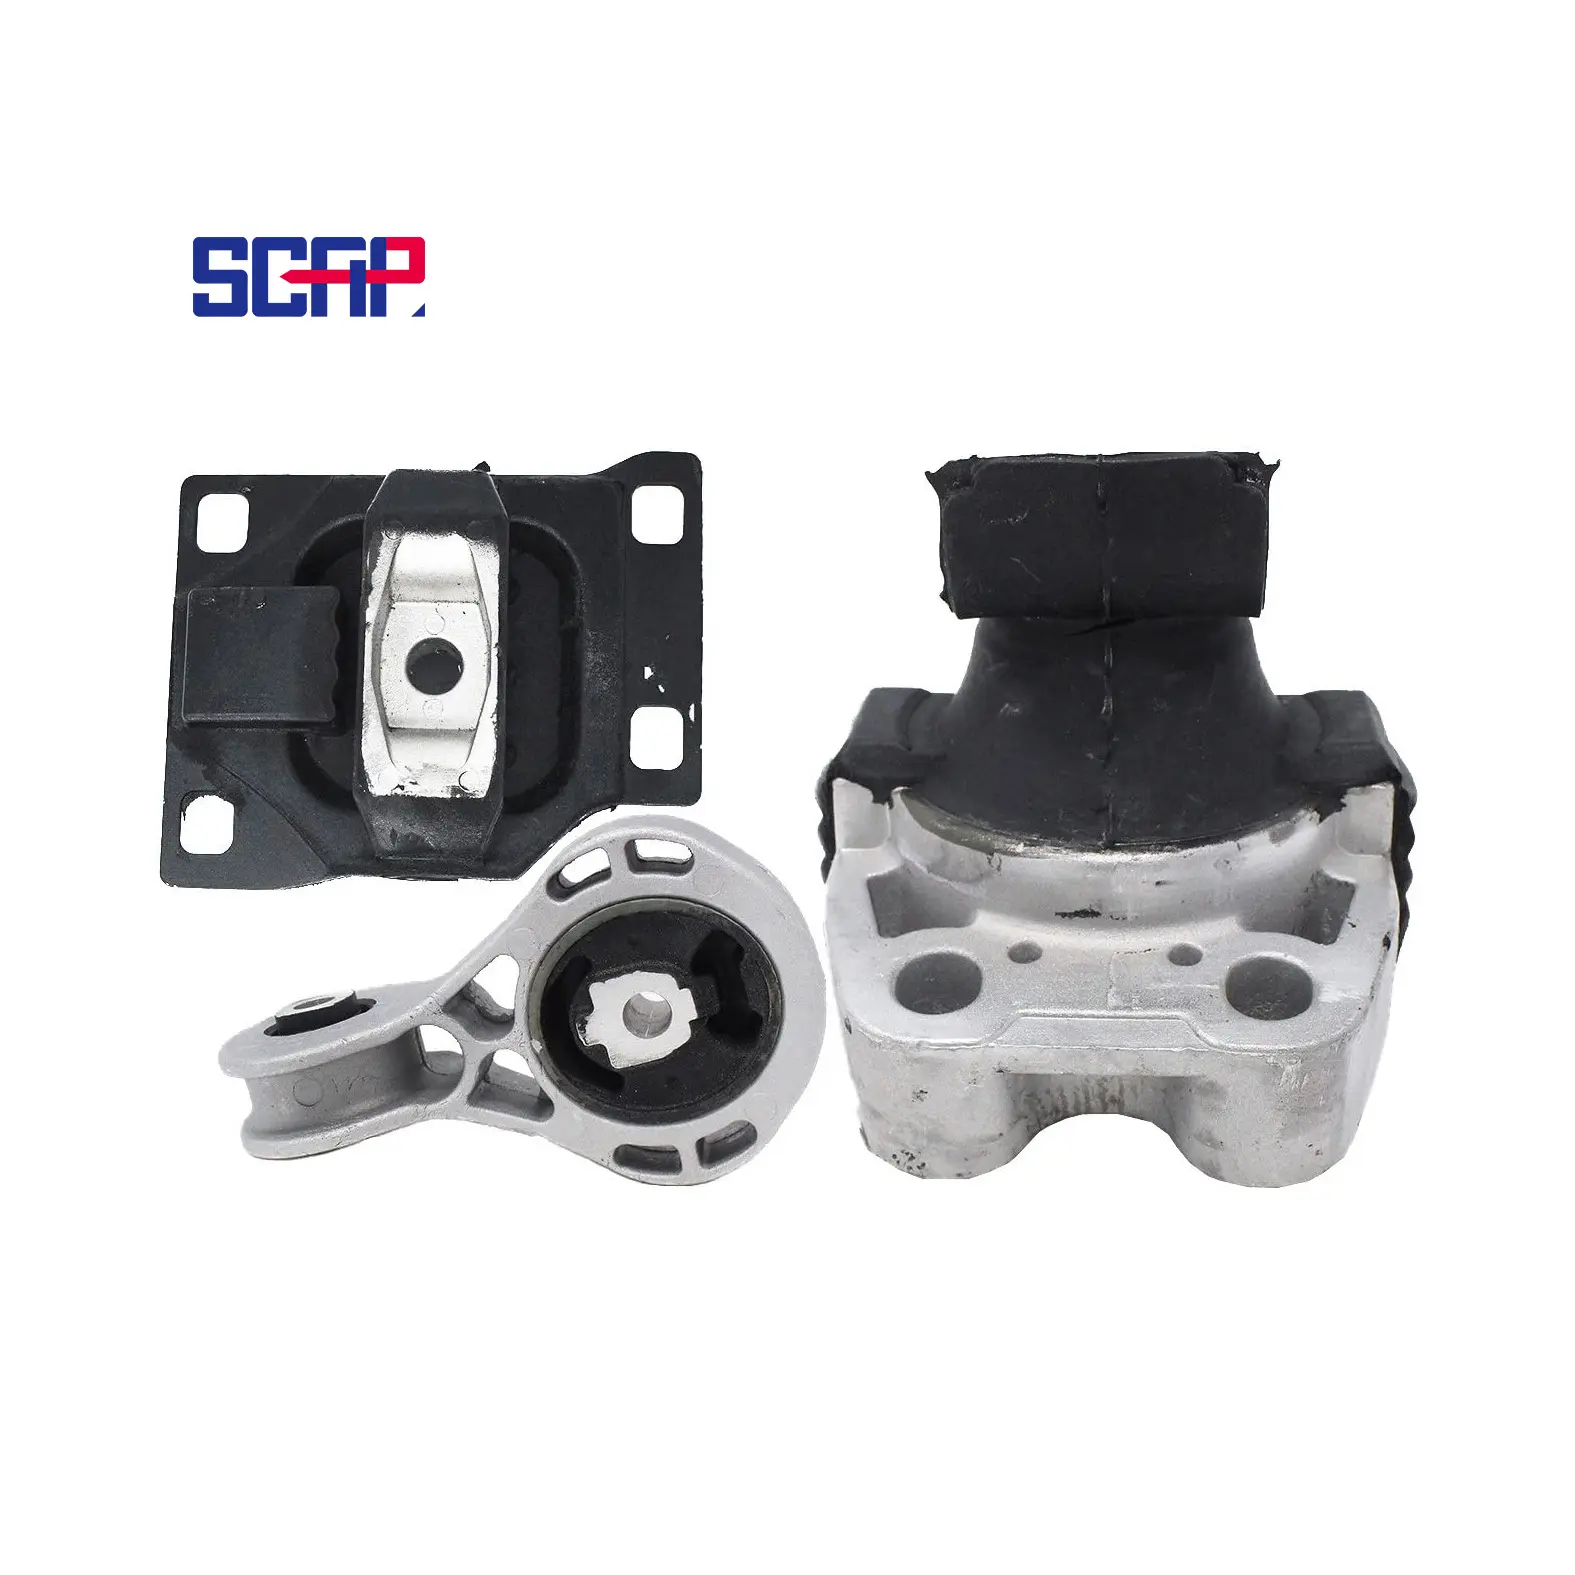 Car Auto Spare Parts Engine Trans Motor 3 Set A5312 A5322 A2986 for Ford Focus 2.0L 2008 2009 2010 2011